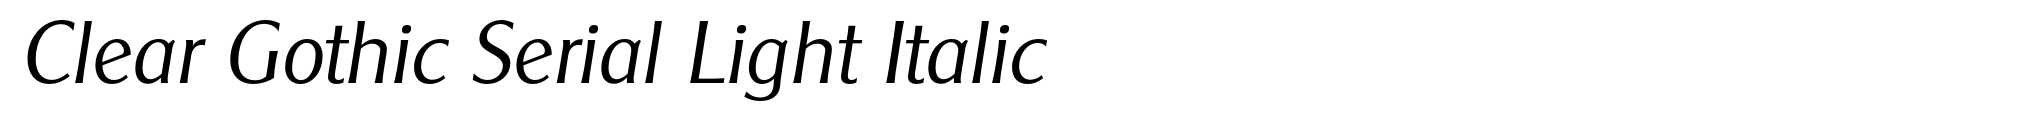 Clear Gothic Serial Light Italic image